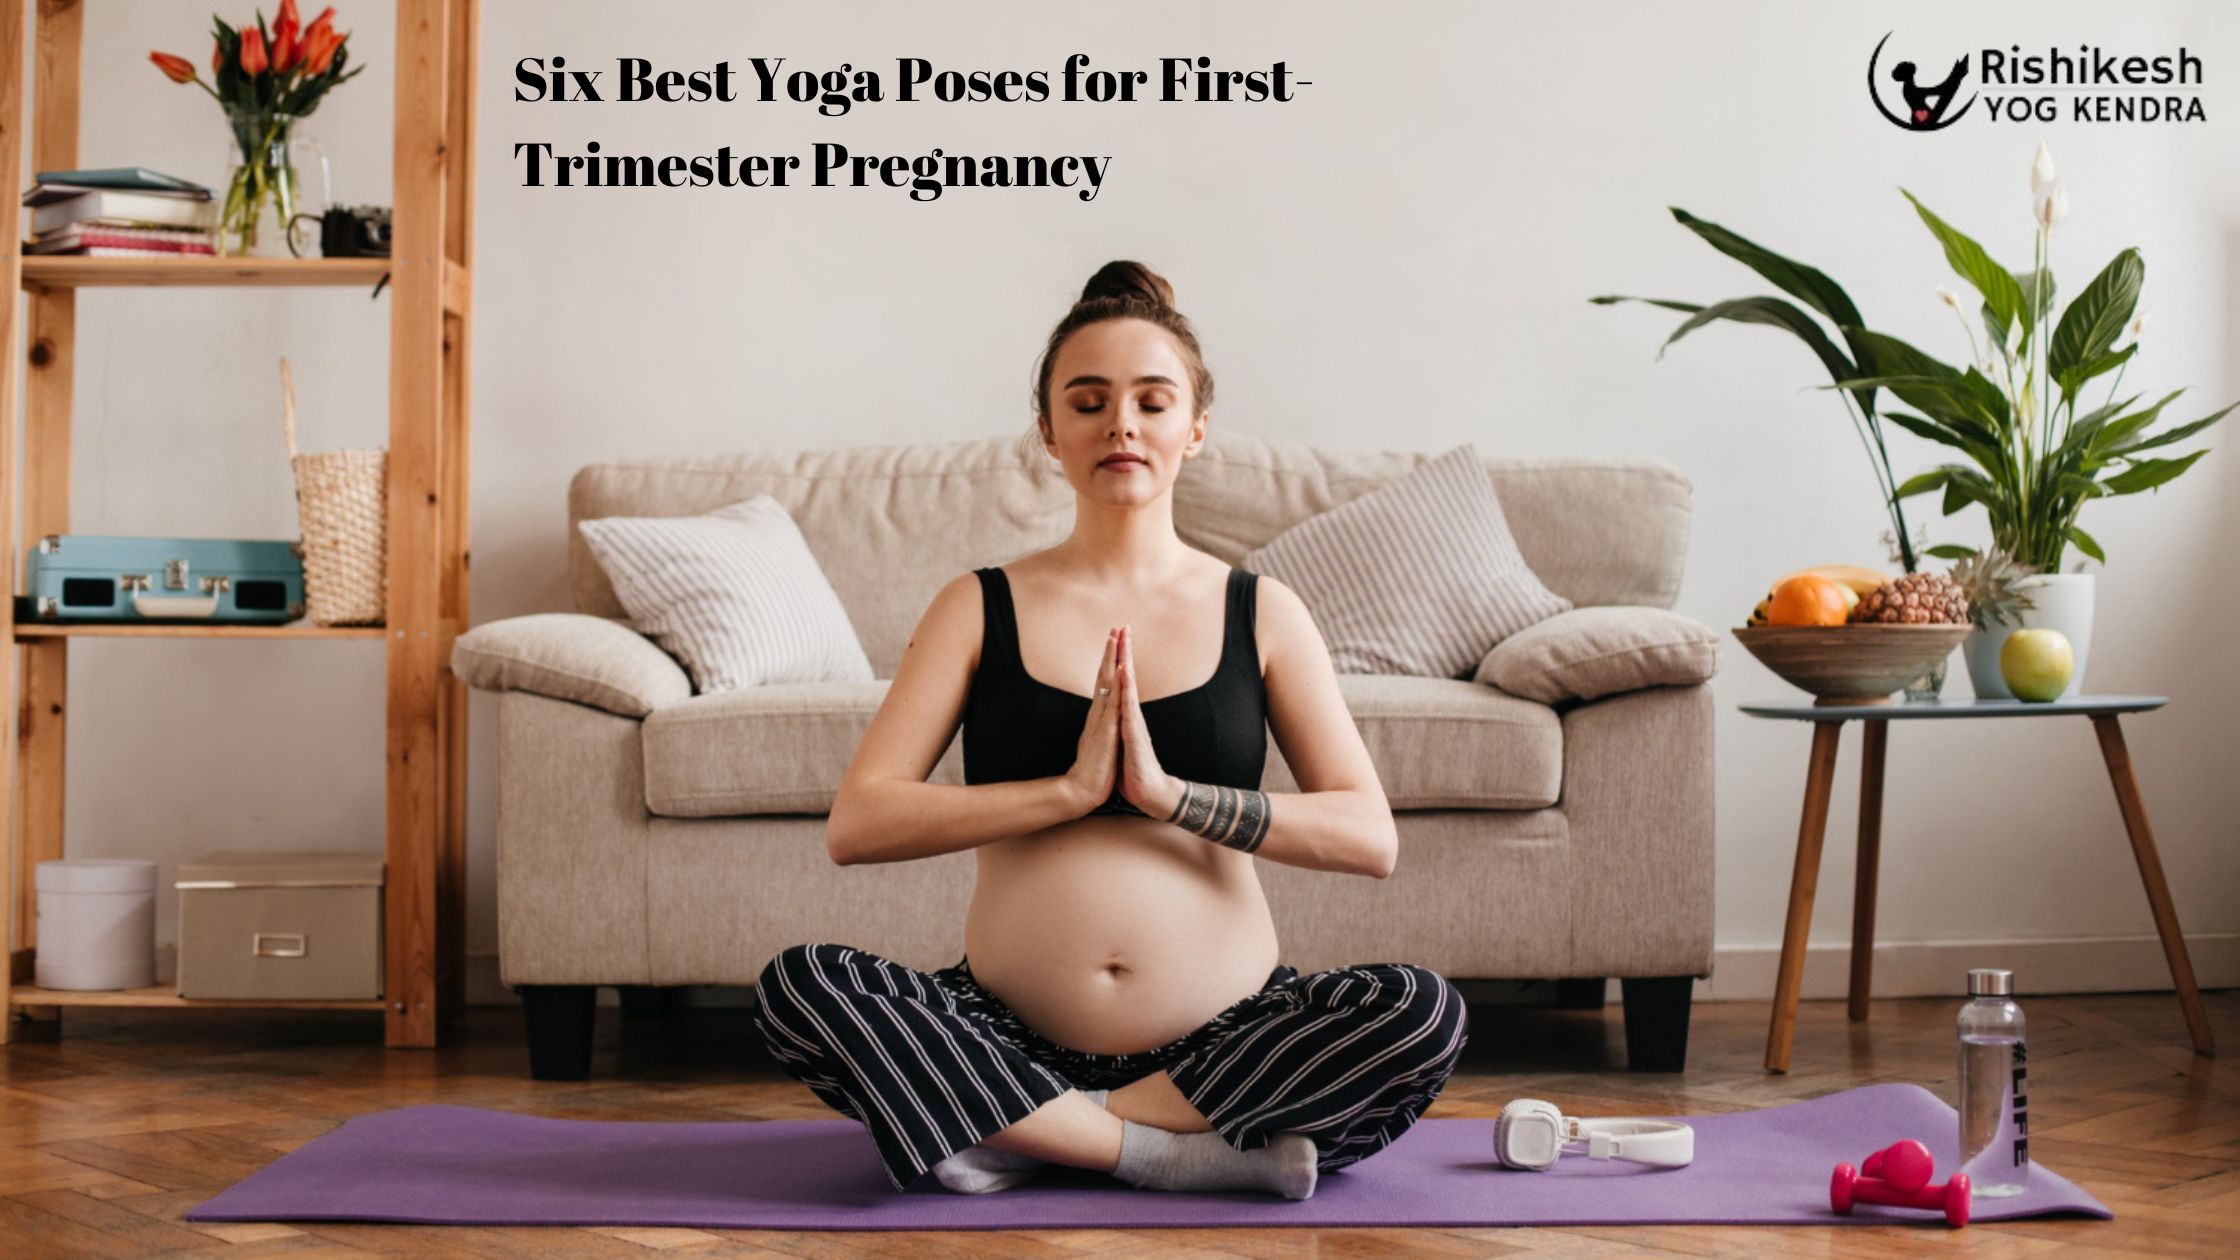 Six best yoga poses for first-trimester pregnancy